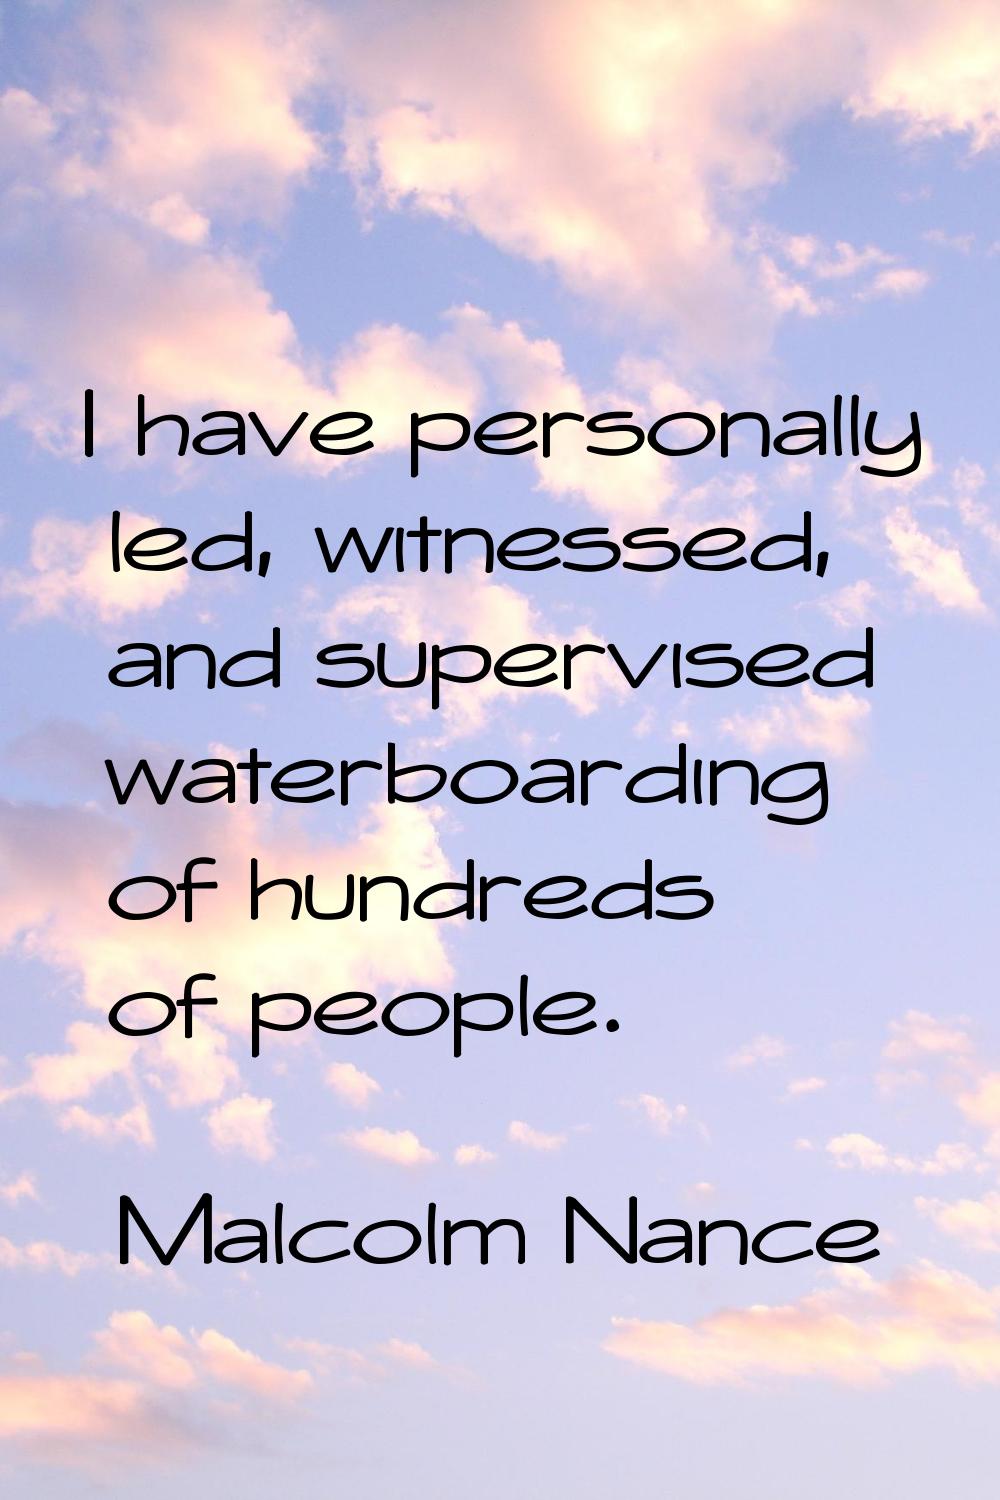 I have personally led, witnessed, and supervised waterboarding of hundreds of people.